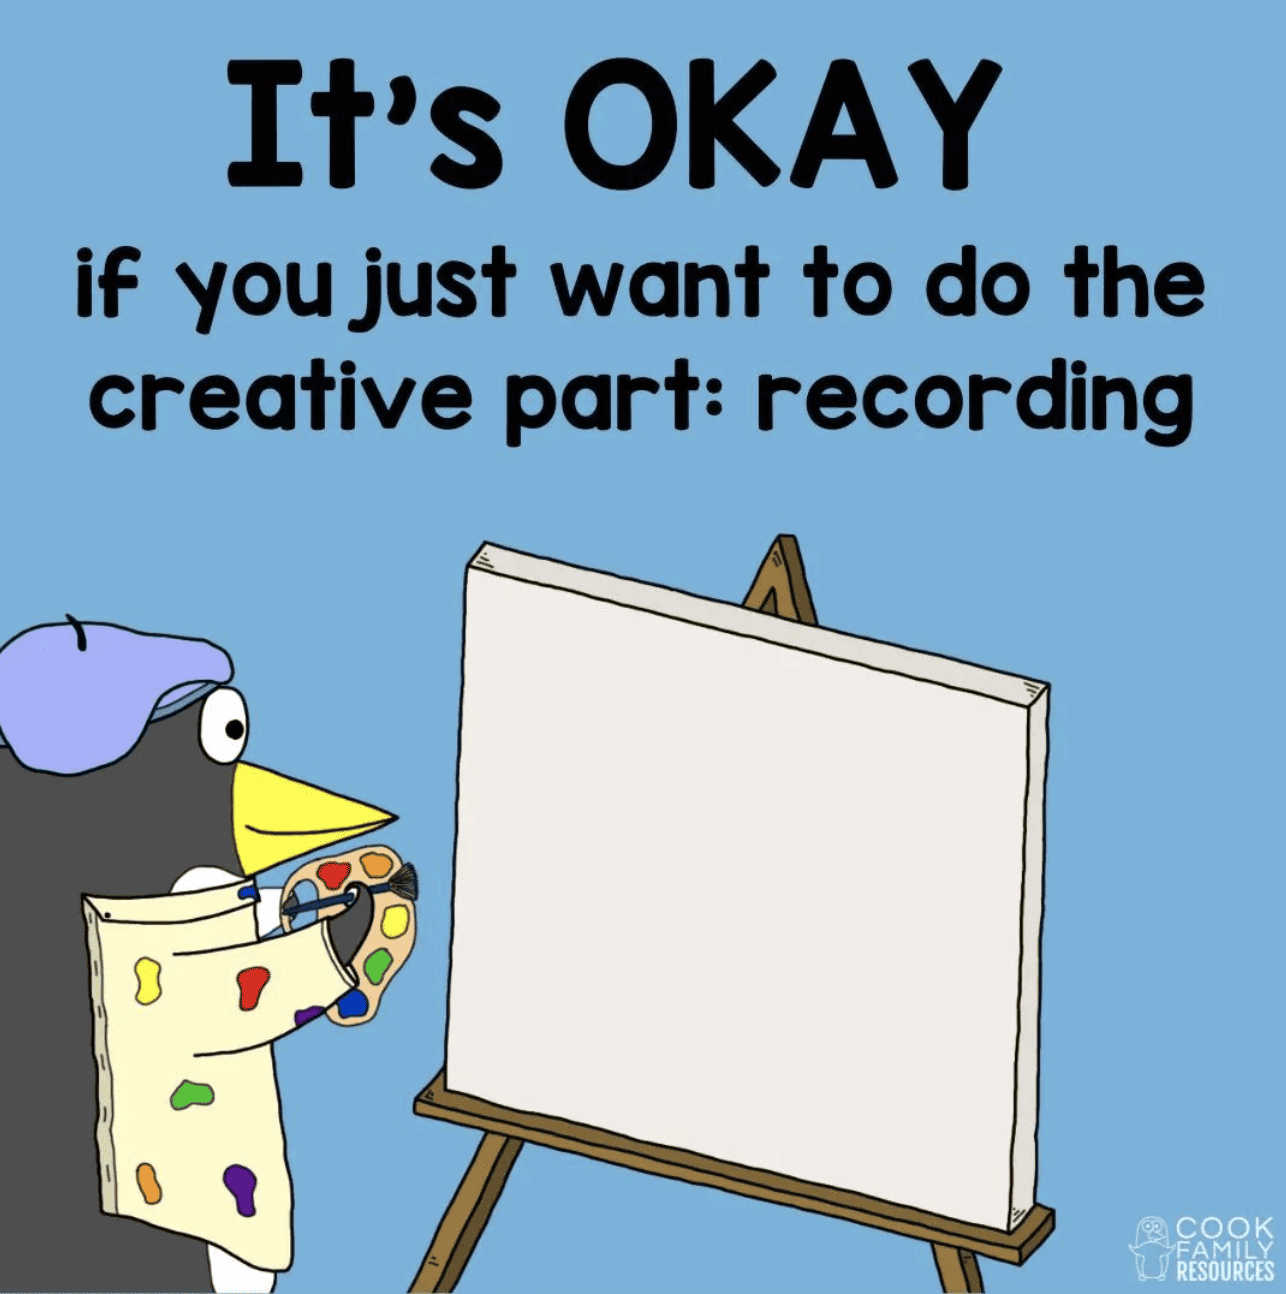 Penguin painting, it's okay if you just want to do the creative part: recording.